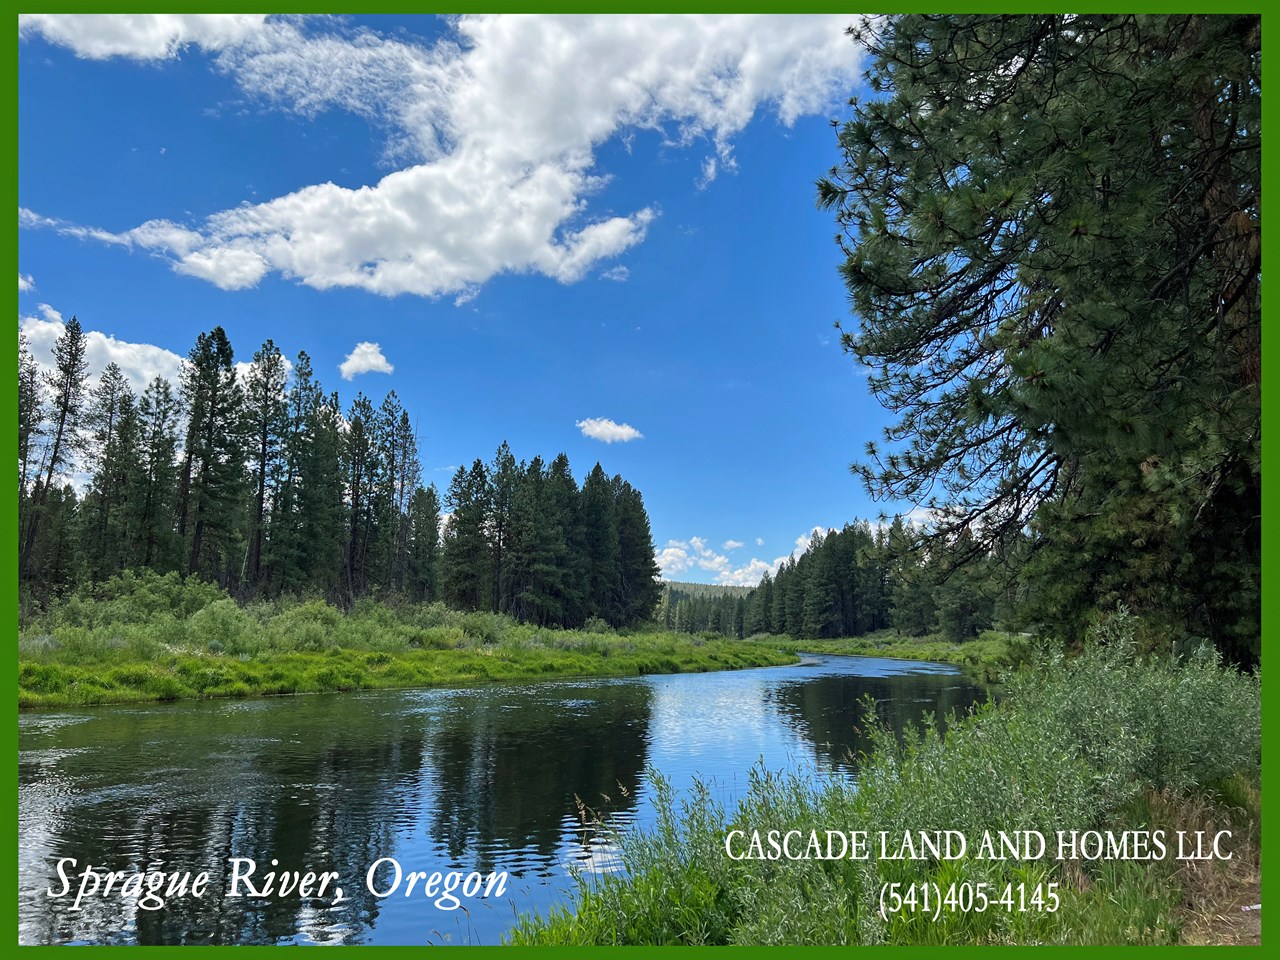 the sprague river is only about a five-minute walk from the property! bring your fishing pole!